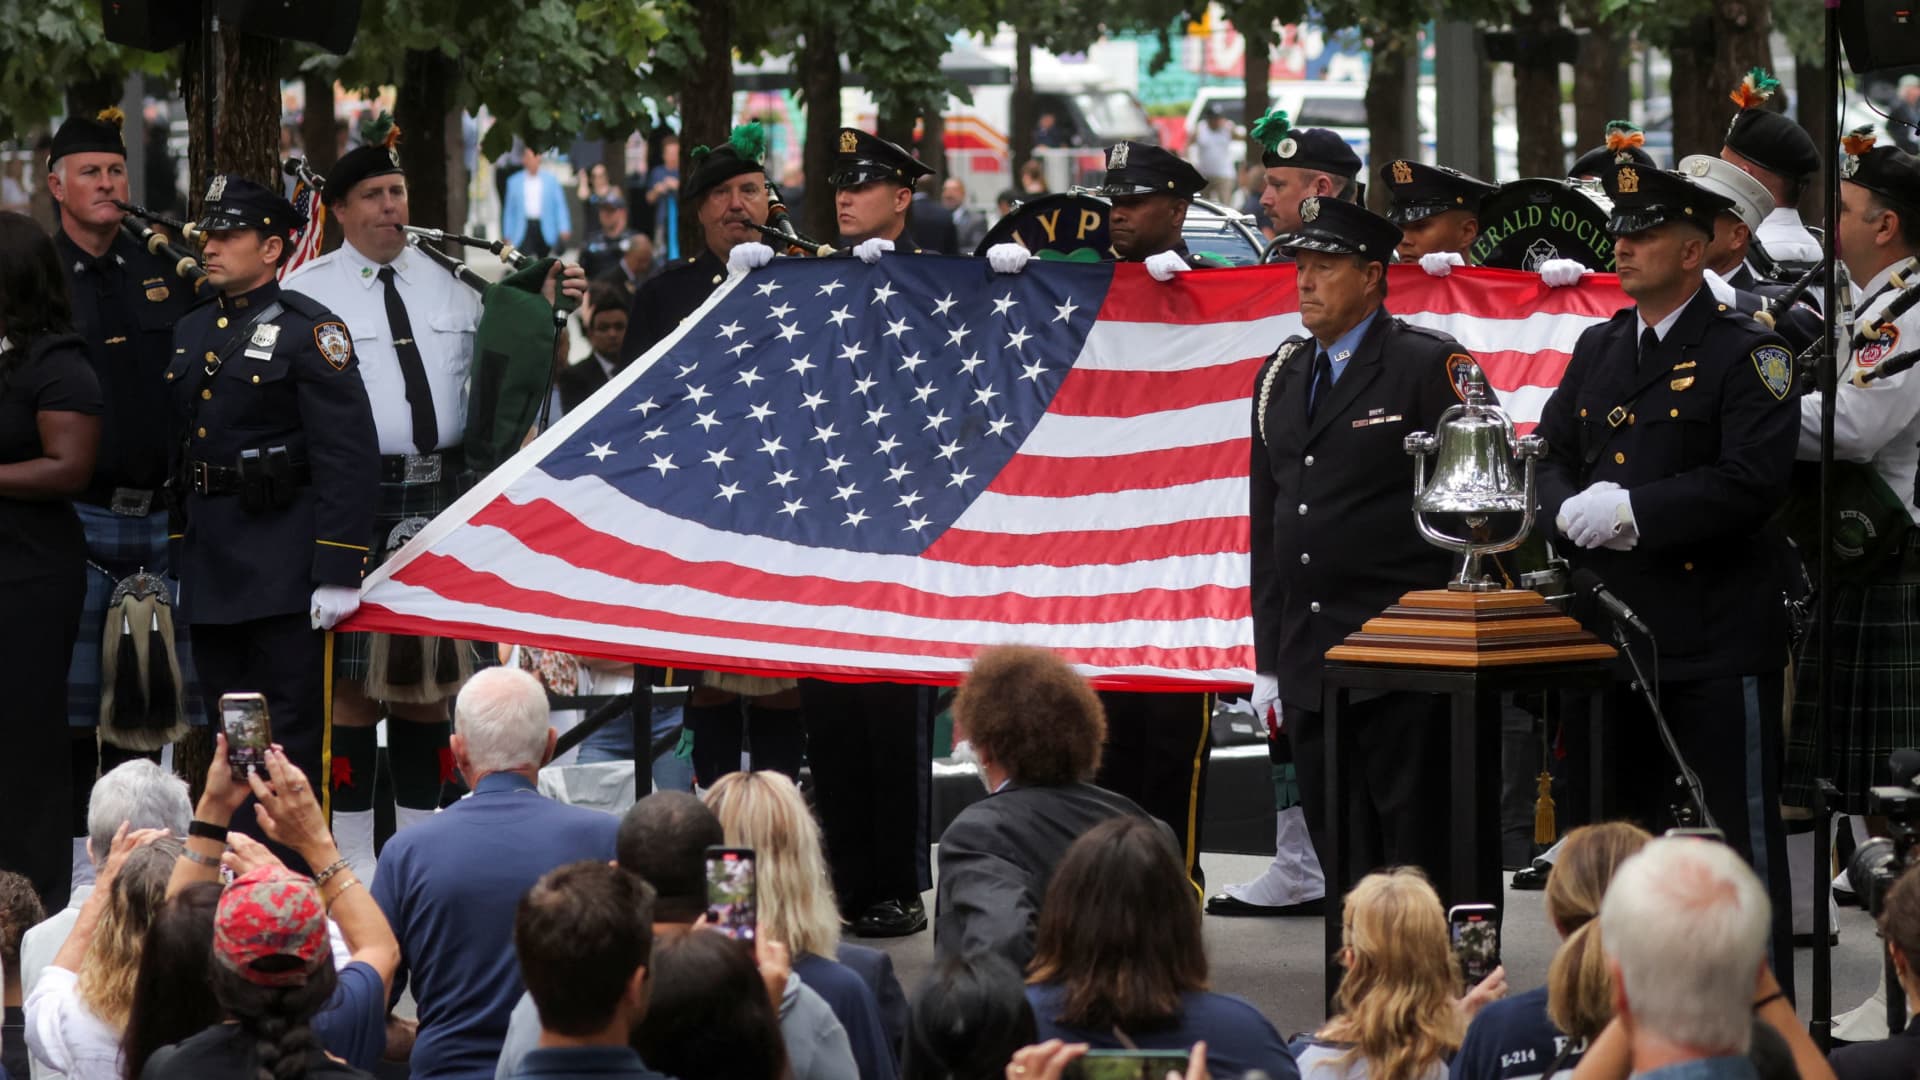 First responders hold a U.S. flag during the bell-ringing ceremony on the 22nd anniversary of the 9/11 attacks at the National September 11 Memorial & Museum in New York City, Sept. 11, 2023.